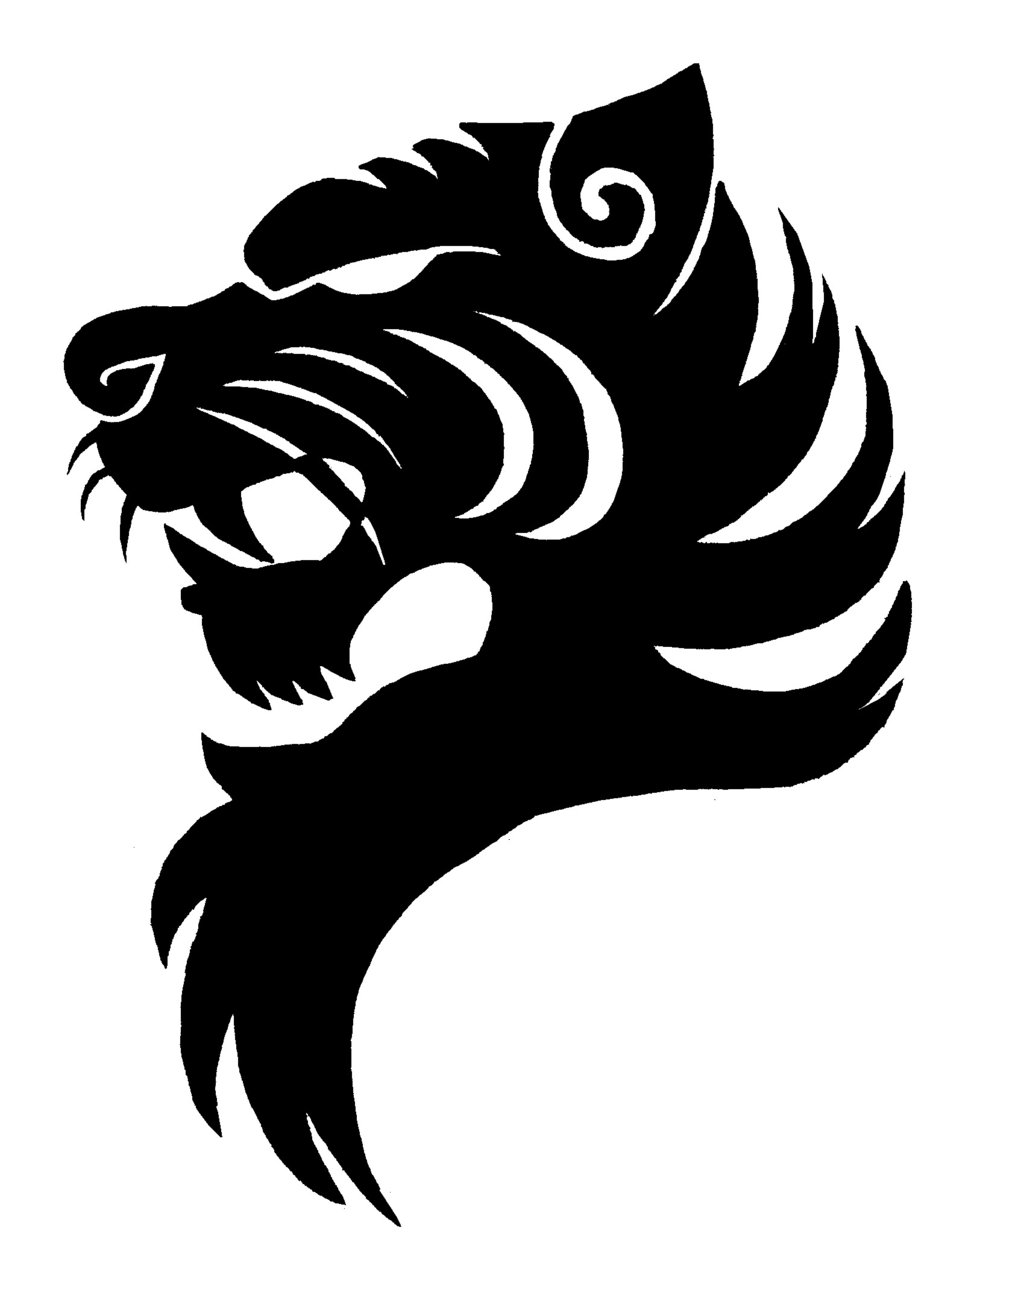 Tiger Logo Black And White   Clipart Panda   Free Clipart Images